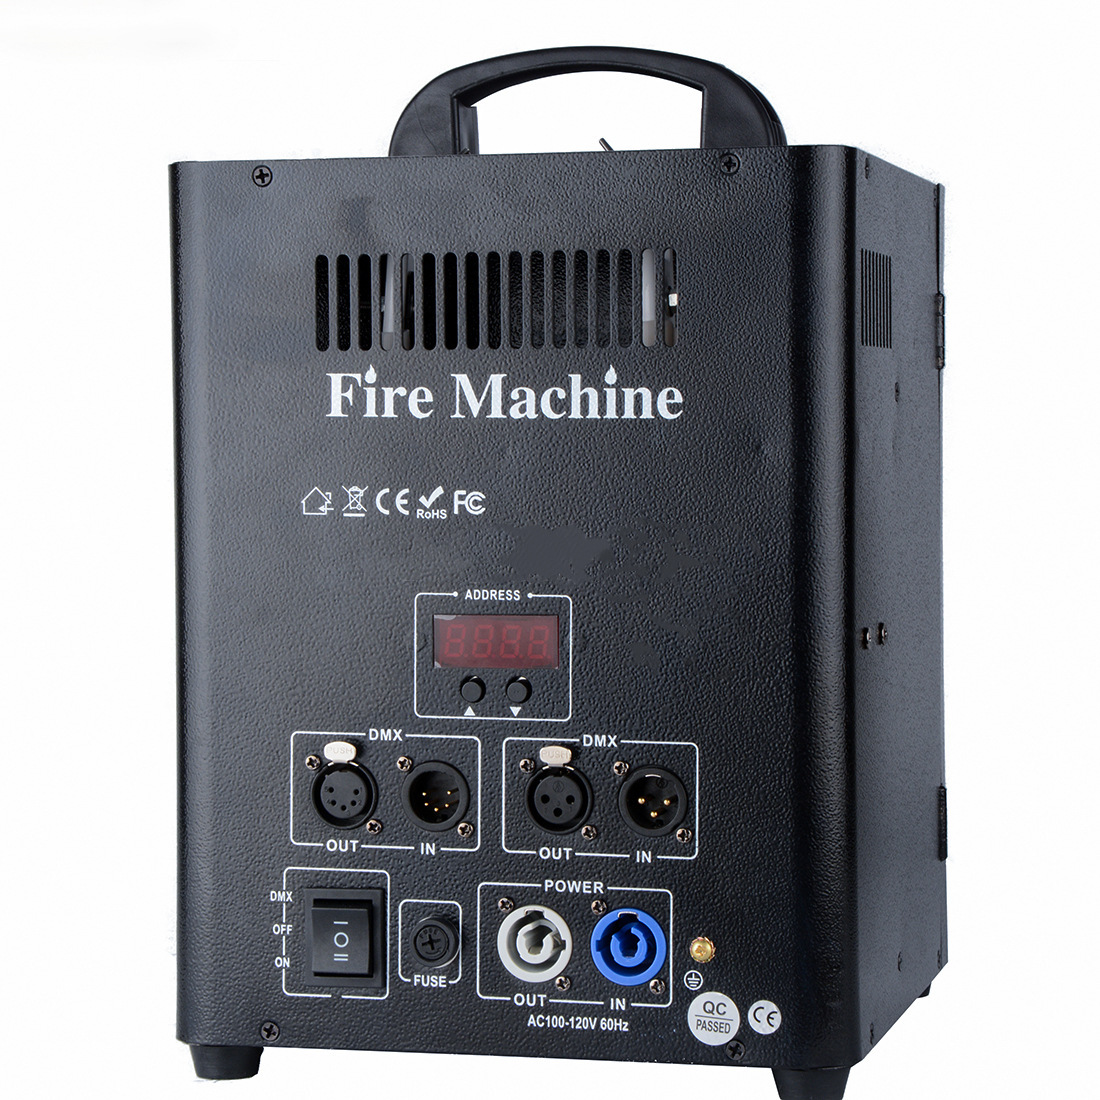 300W Performance Double-headed Color Flame Machine FD-FIRE300